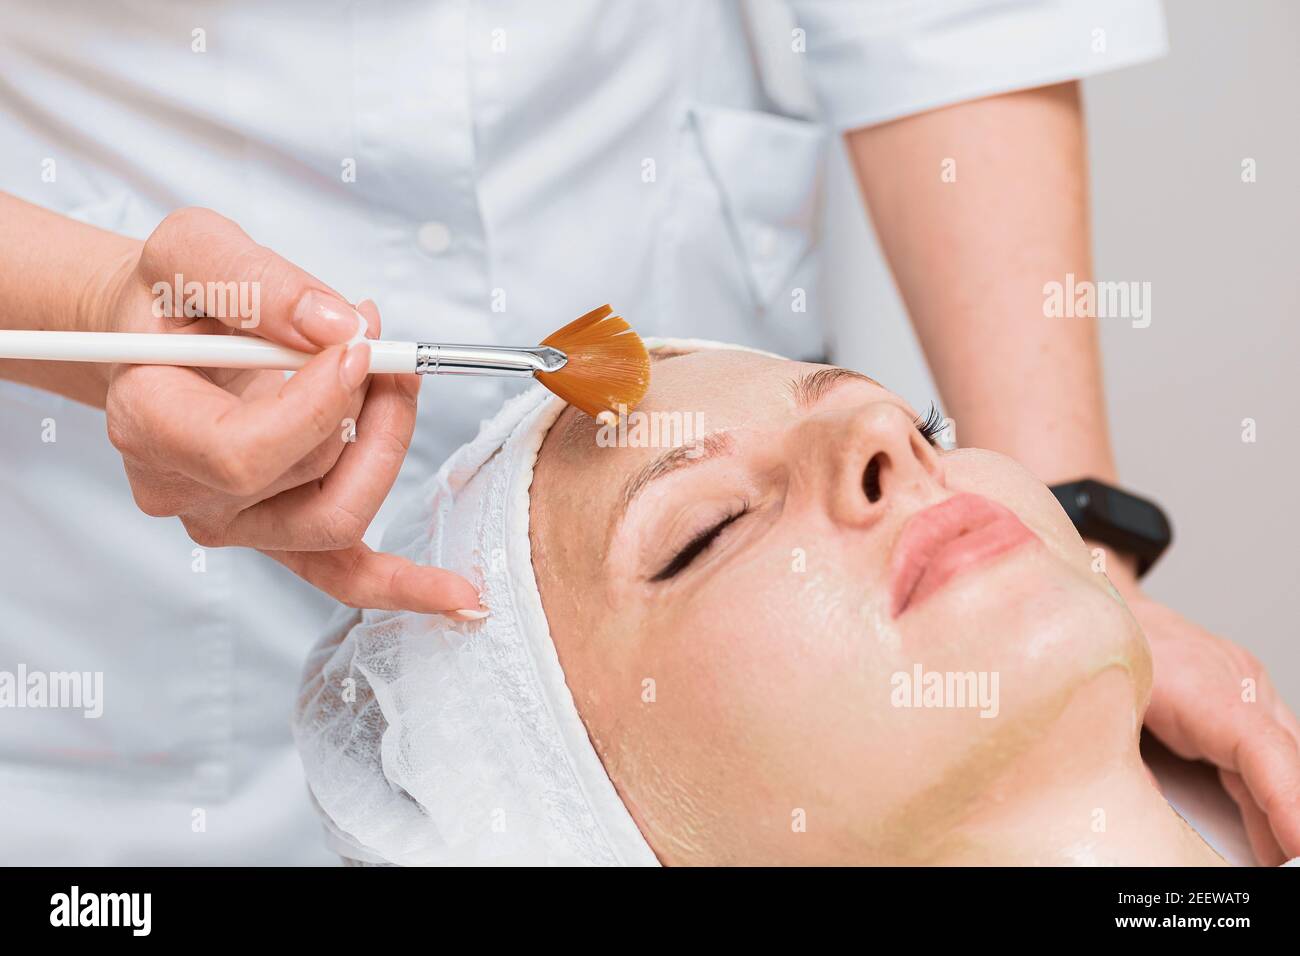 Procedure with an enzyme mask in modern cosmetology. Stock Photo